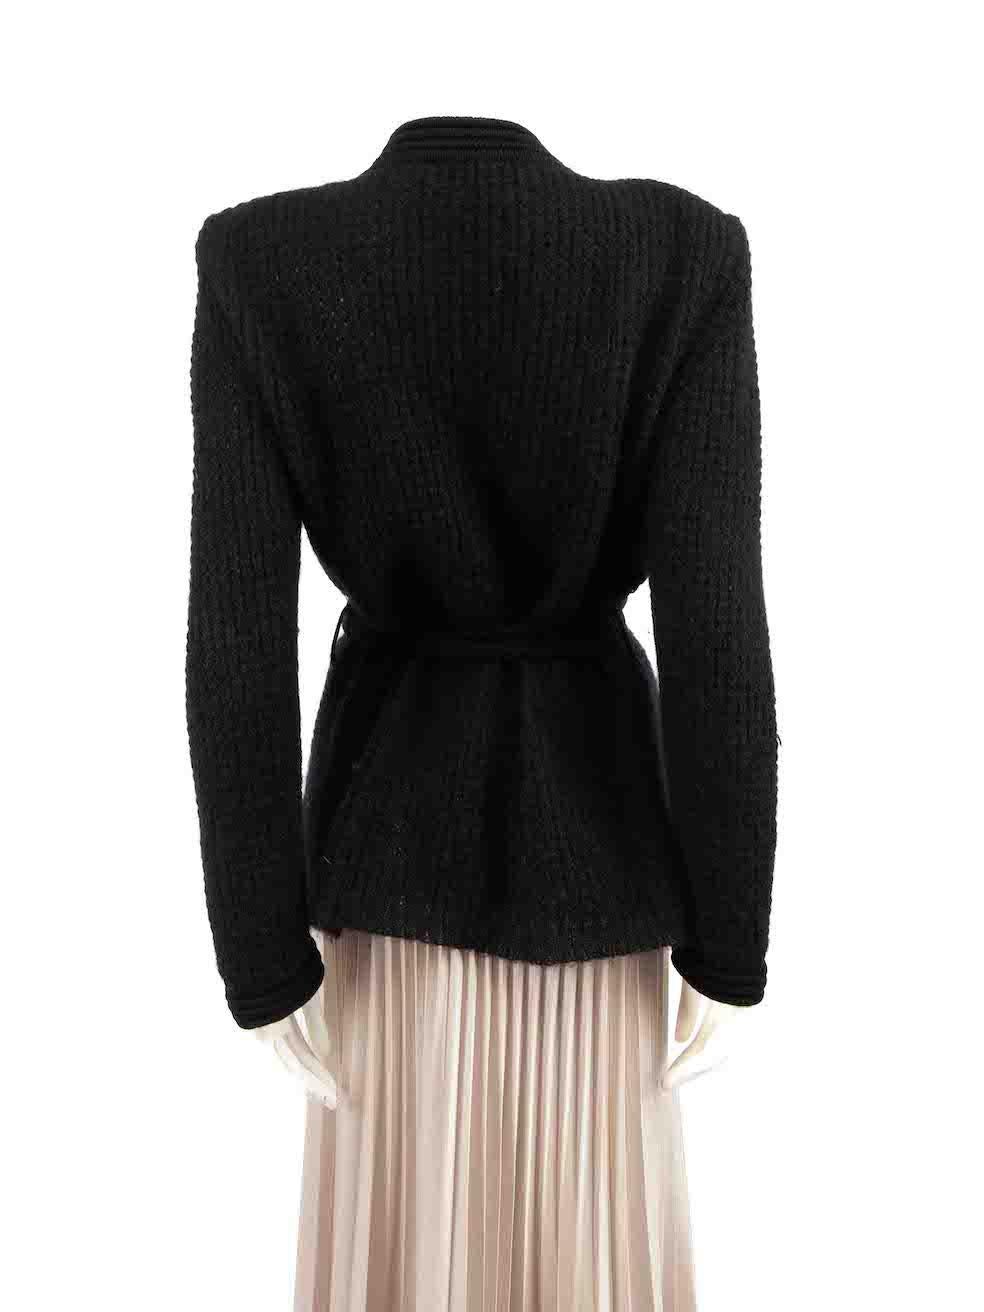 Balmain Black Mohair Knit Cardigan Size L In Good Condition For Sale In London, GB